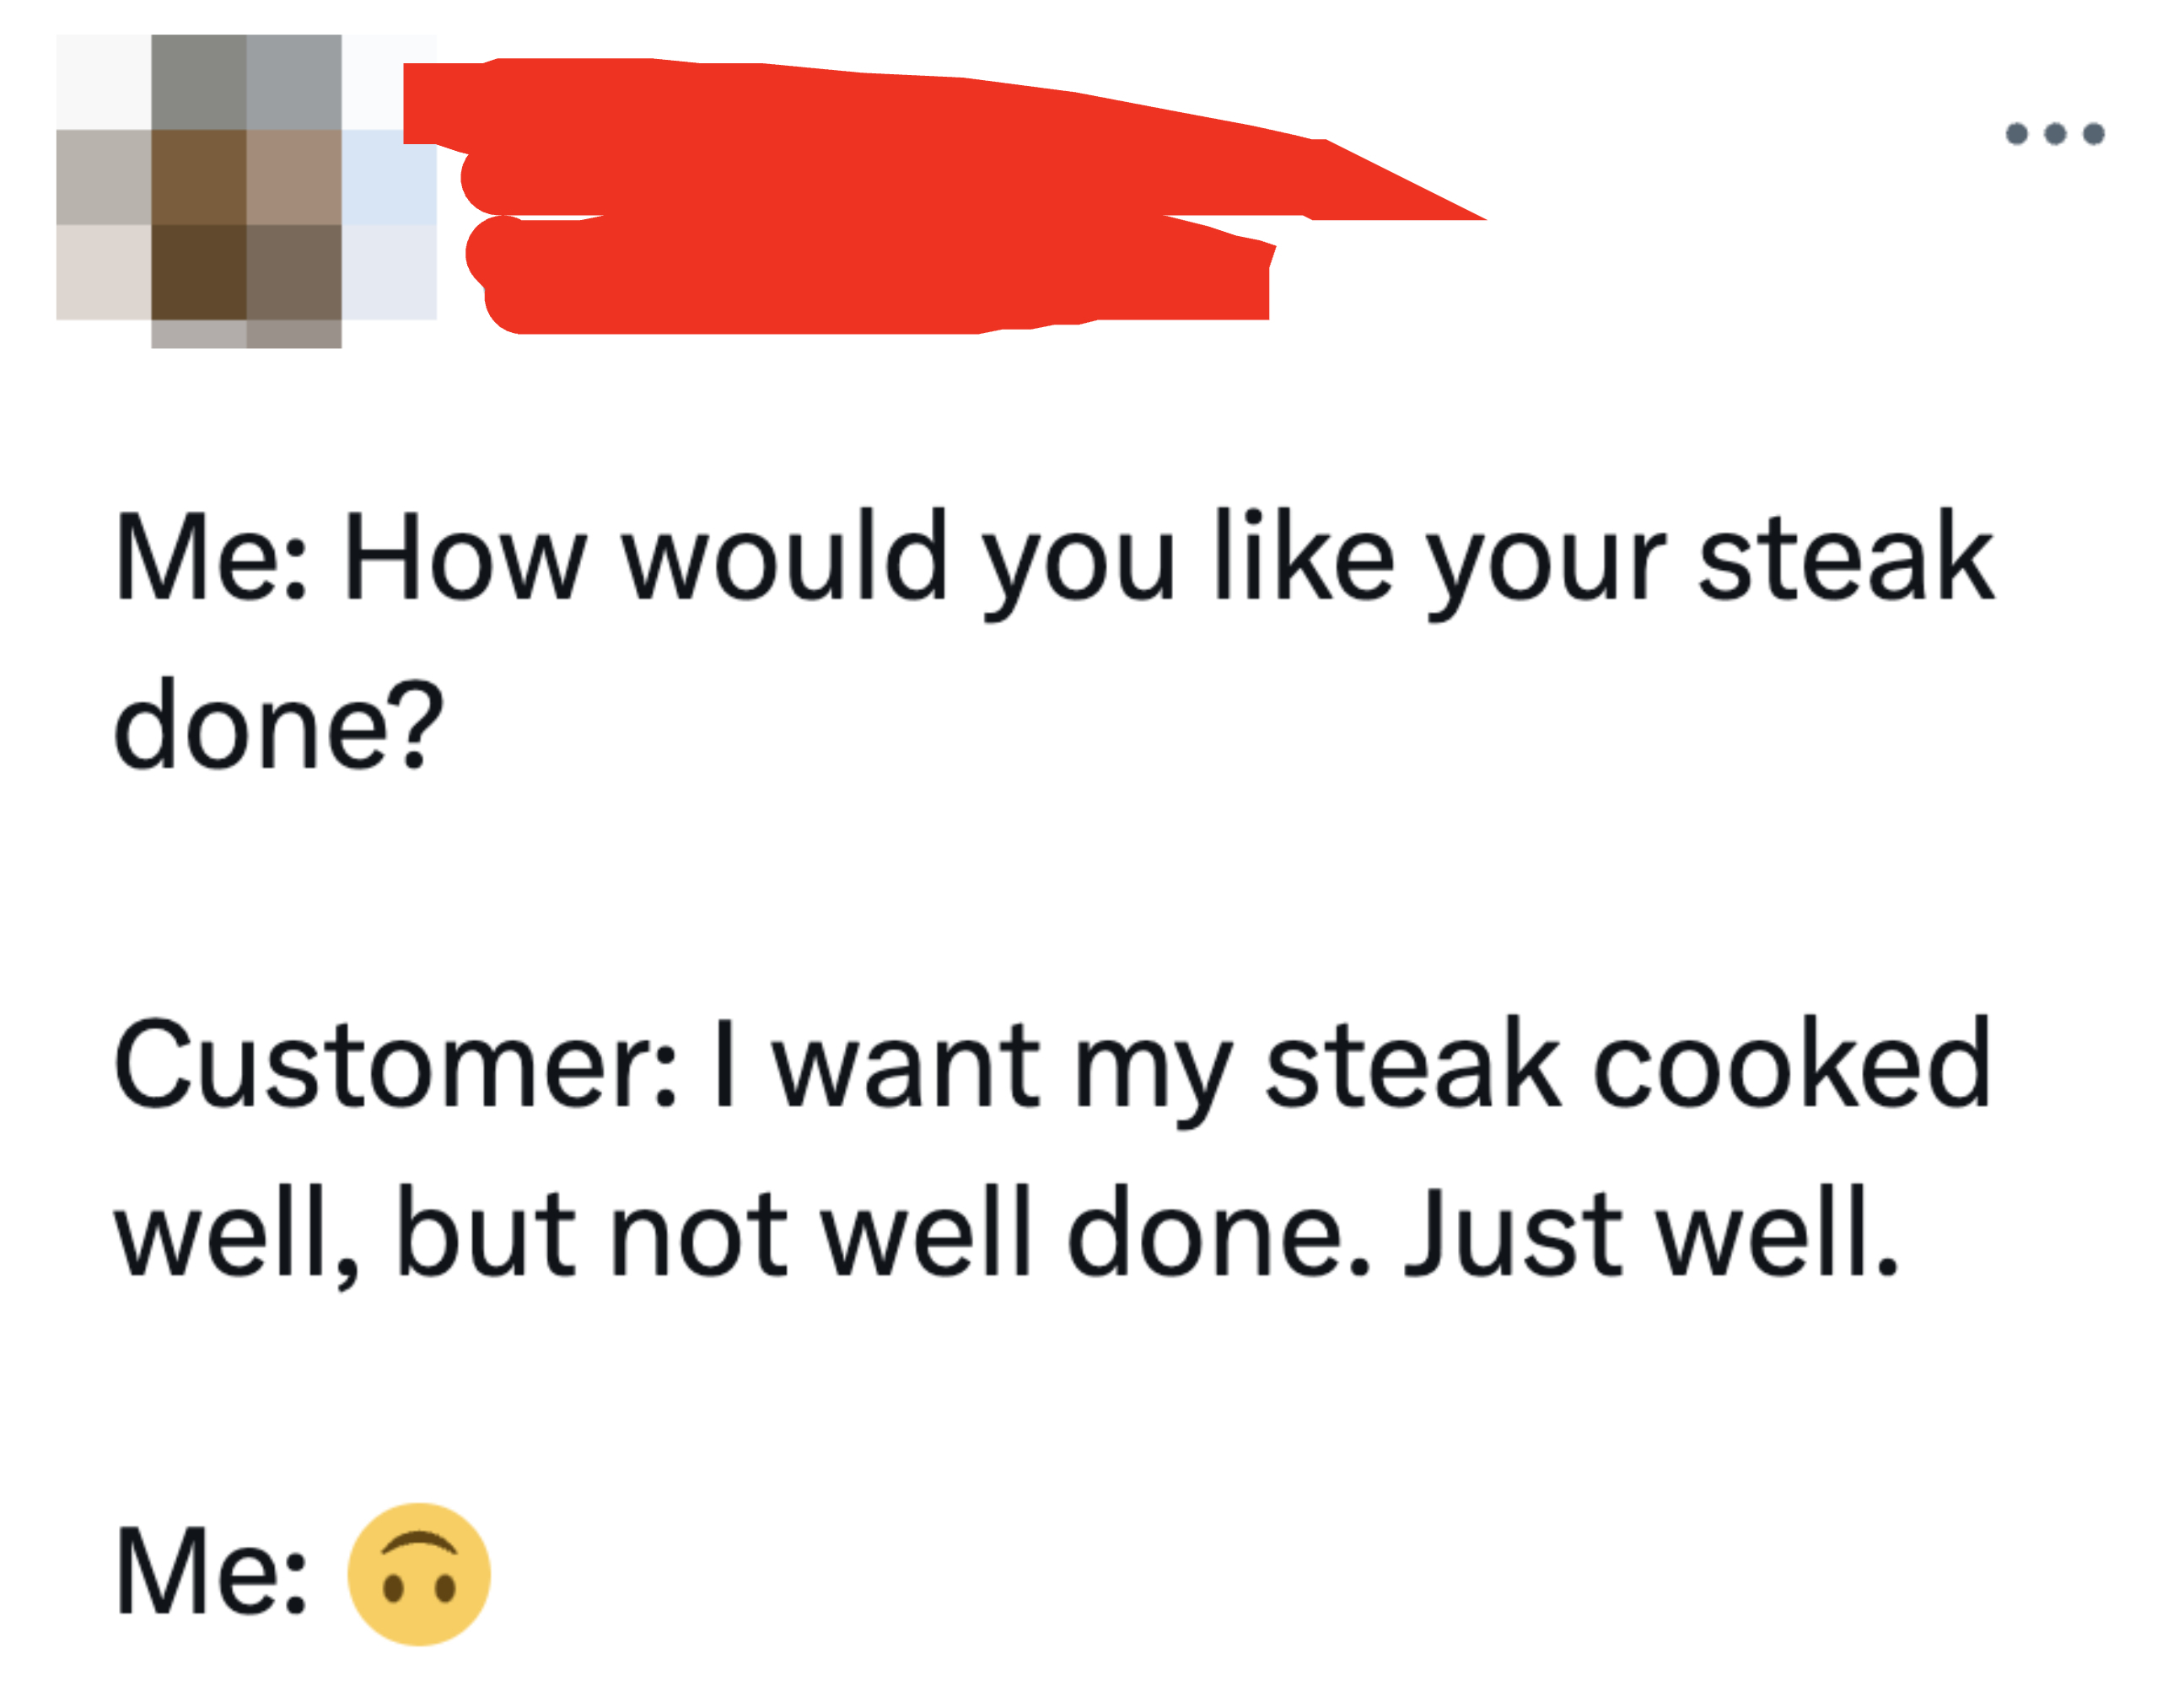 &quot;I want my steak cooked well, but not well done. Just well.&quot;